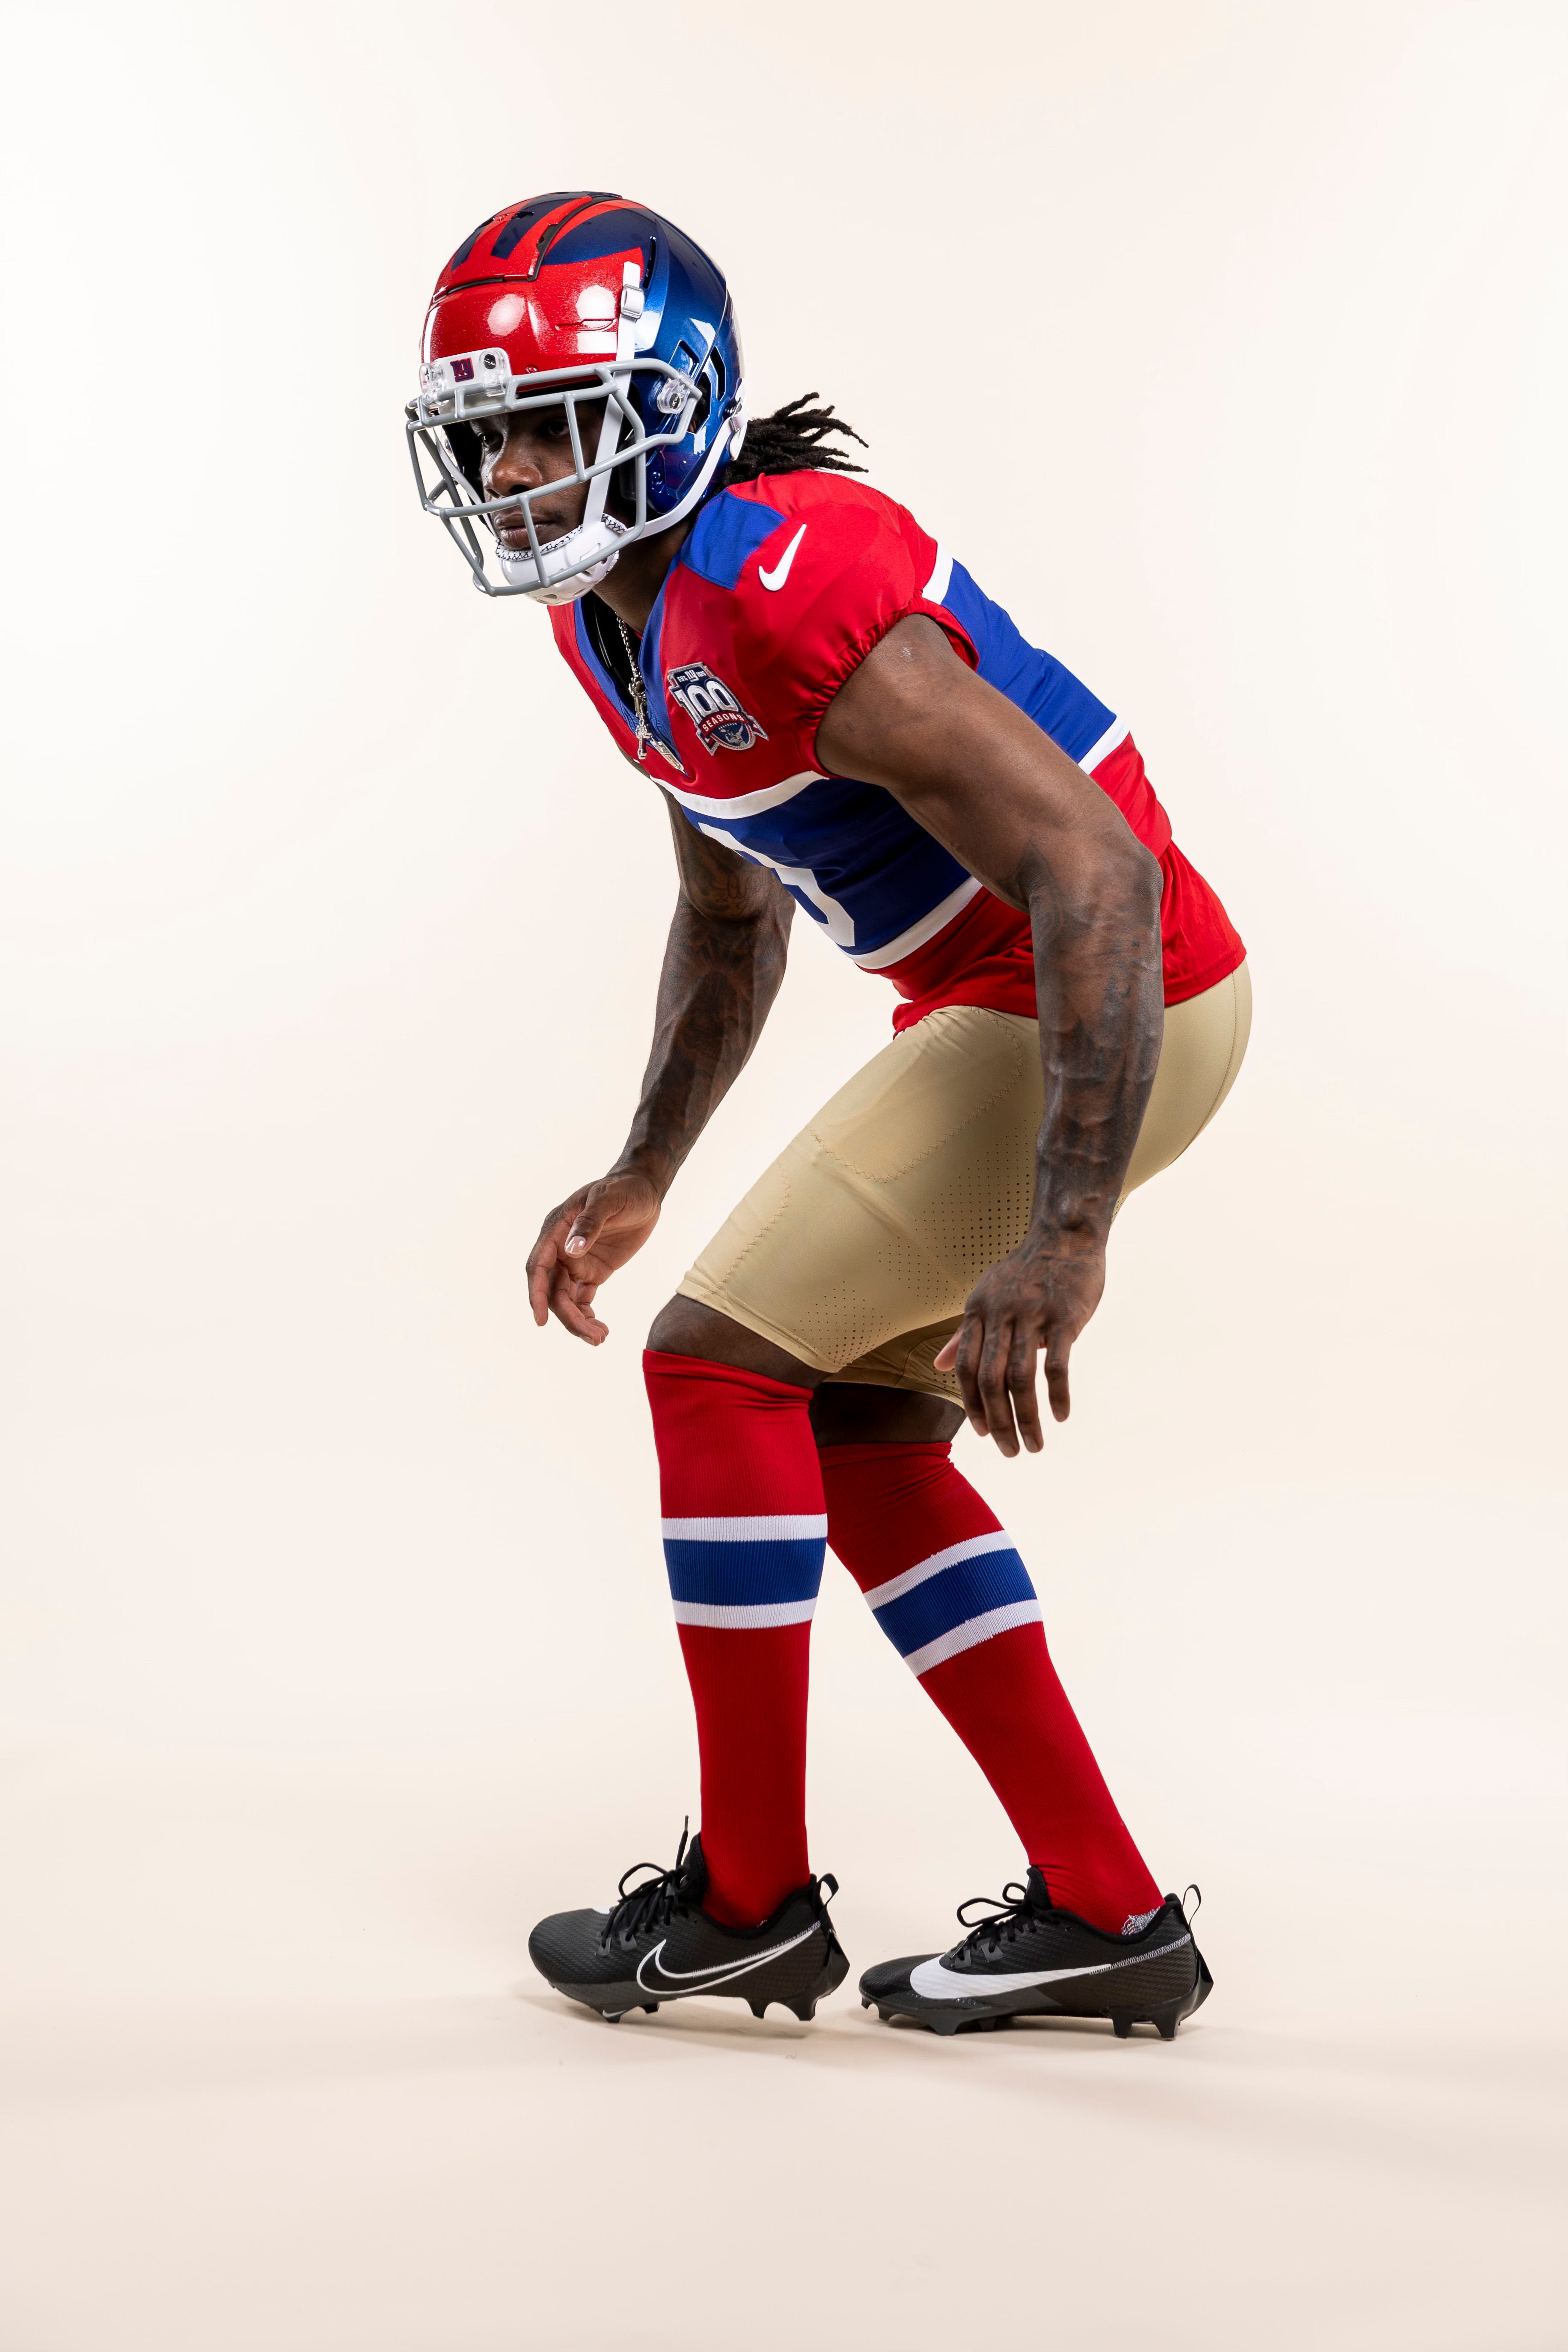 New jersey Giants: Big Blue celebrating 100 years with Century Red uniforms